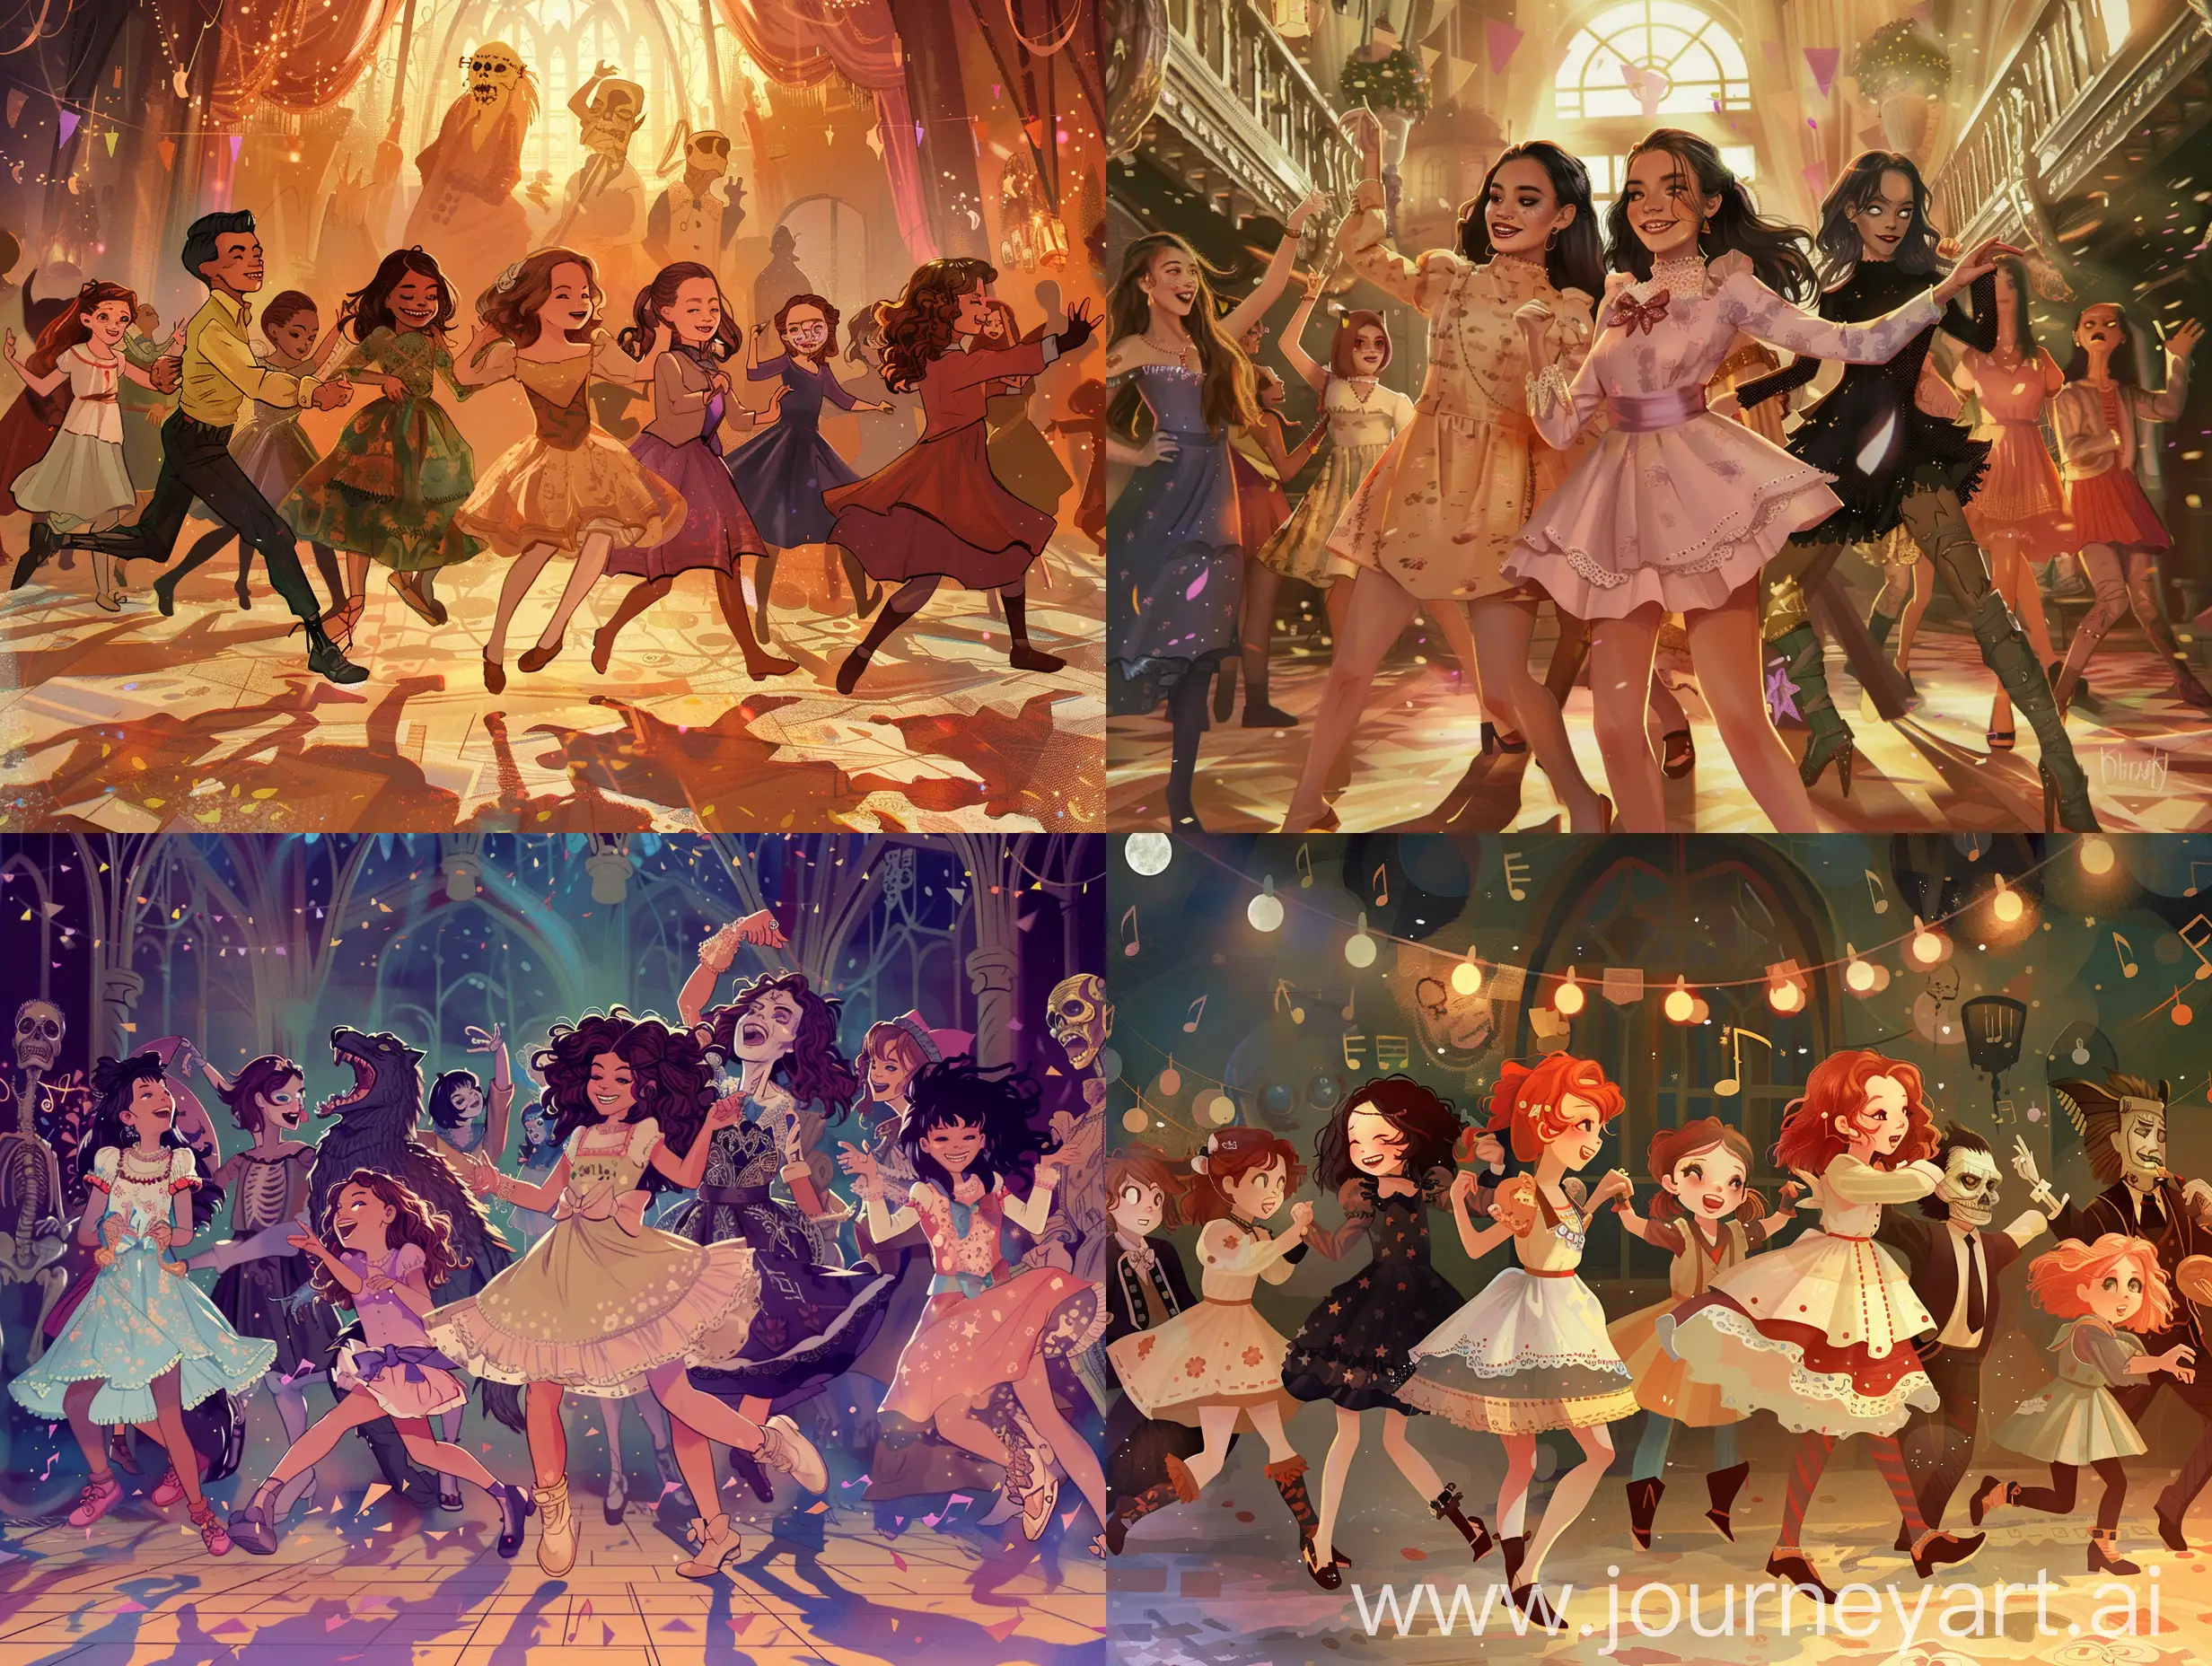 A magical modern fairy tale mixed with the delicate intricacies of porcelain doll style, creating a visual work that is both fantastically colorful and artistically vibrant. Introducing warm and rich color palettes, elaborate costume designs, and dreamy background elements to set a vivid and colorful scene where a group of girls in adorable outfits joyfully dance. Their actions are lively and nimble, resembling the fluttering of musical notes. The backdrop is a wonderful ball scene, with vampires, Frankenstein's creature, werewolves, and revived mummies all dressed in festive attire, following the girls and together performing a magical dance. The entire scene should be filled with the festive ambiance of the night, while maintaining a dreamy and slightly humorous style, as if it were a specially crafted celebration for mythical beings. The overall feeling is both wild and romantic, echoing the lyrics’ celebration of freedom, dreams, and fun.